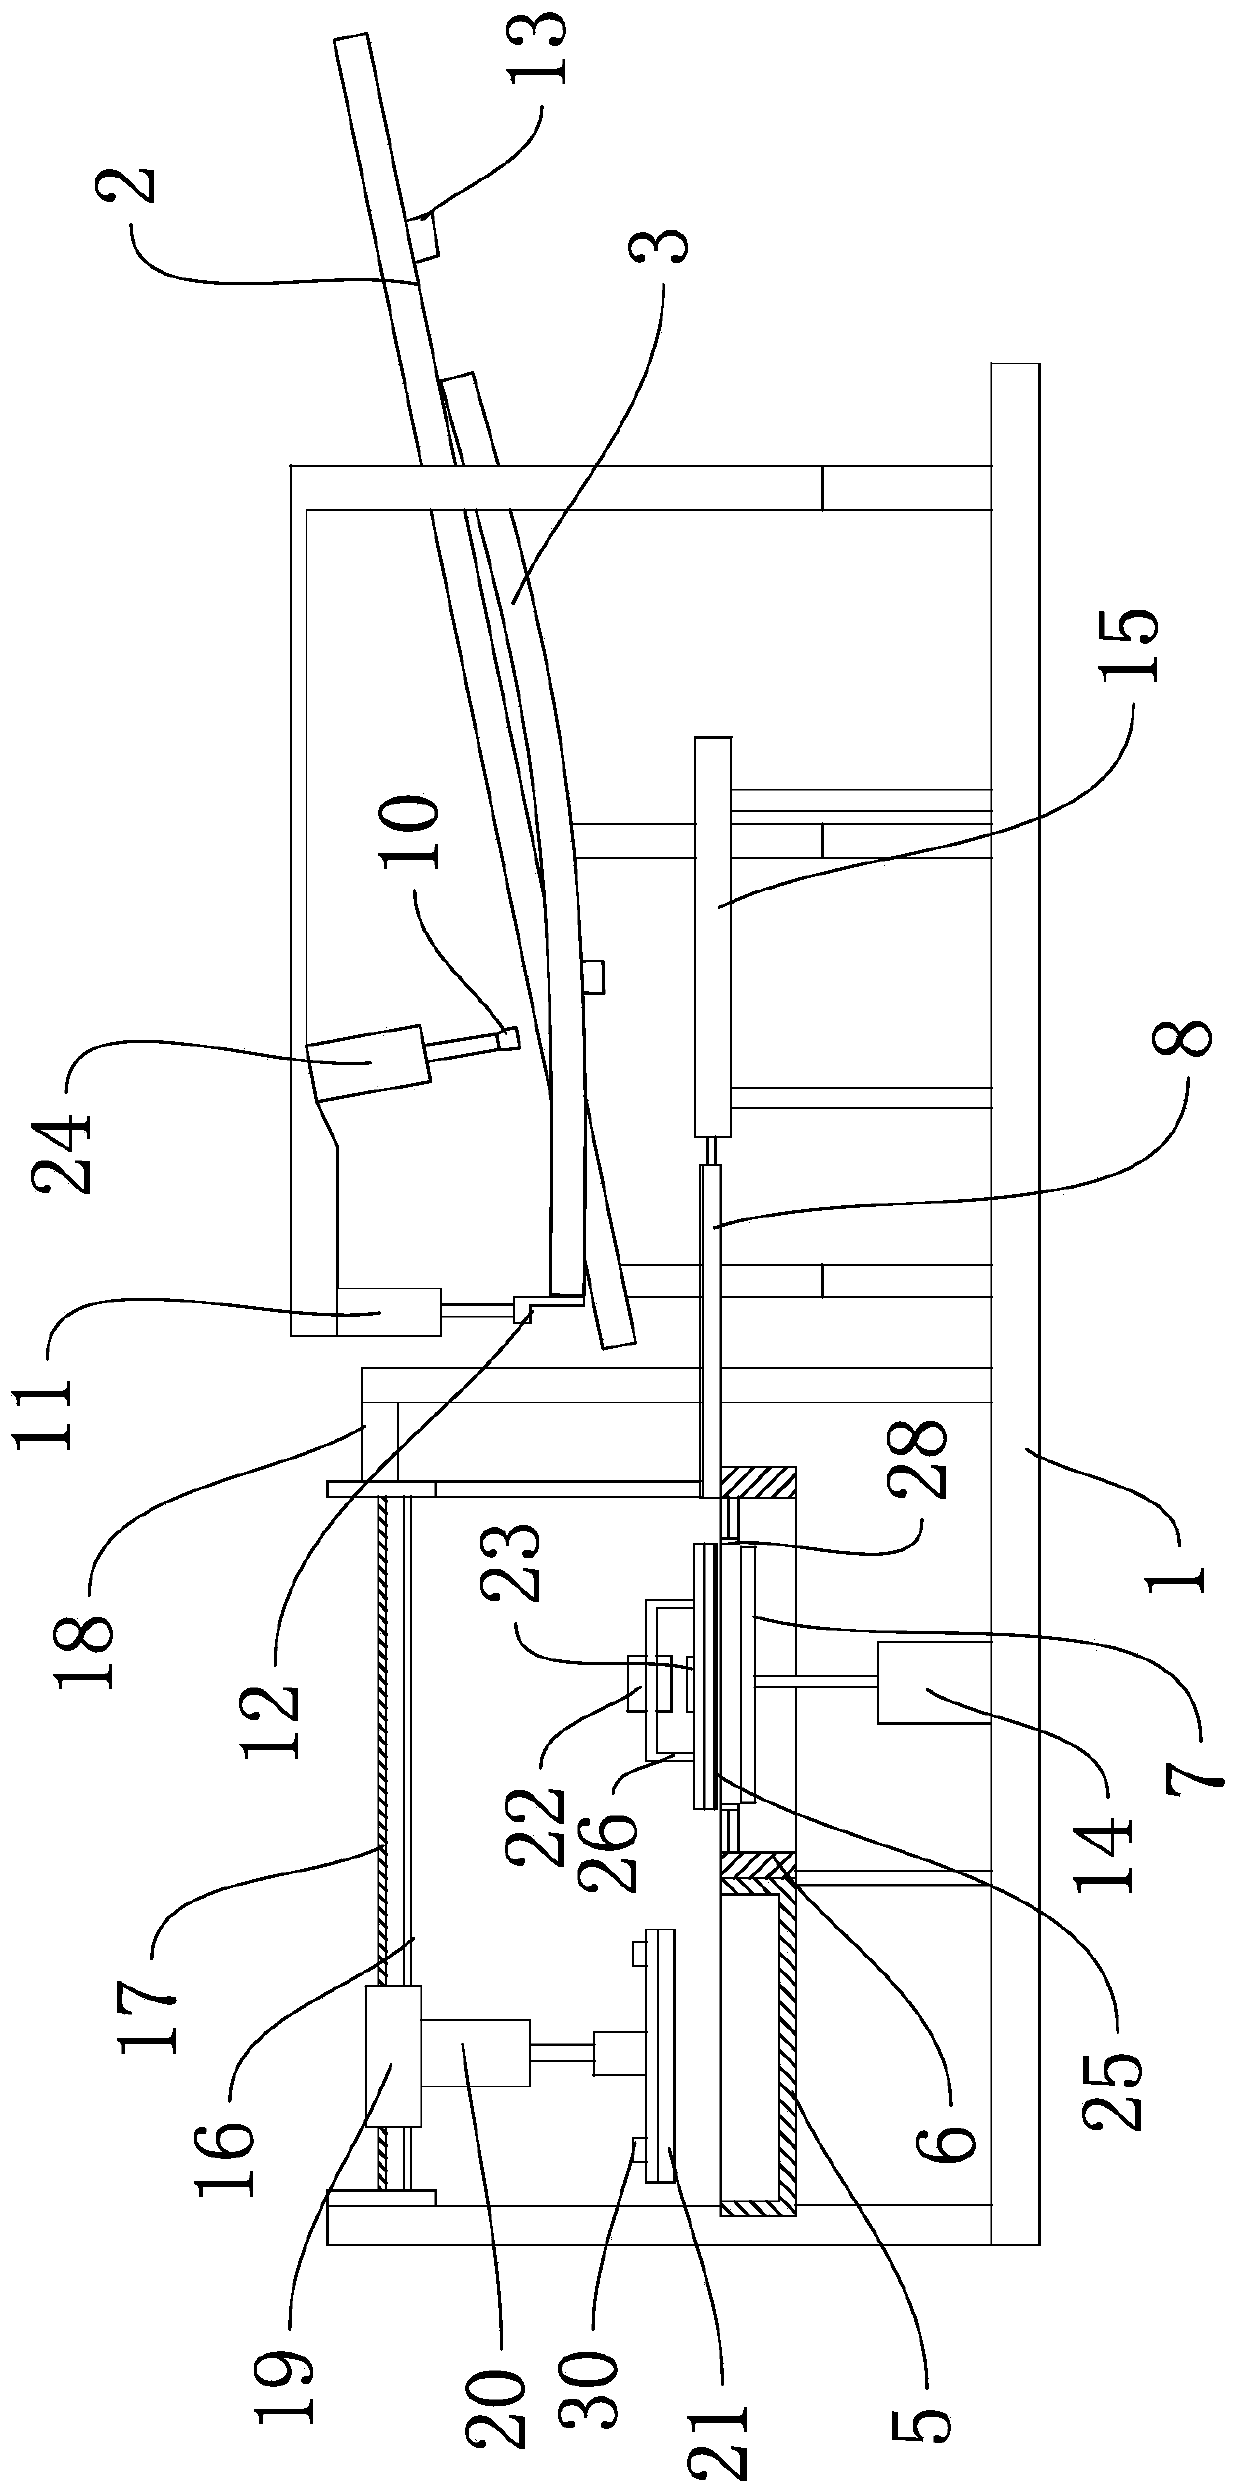 Ferrite sorting and stacking device